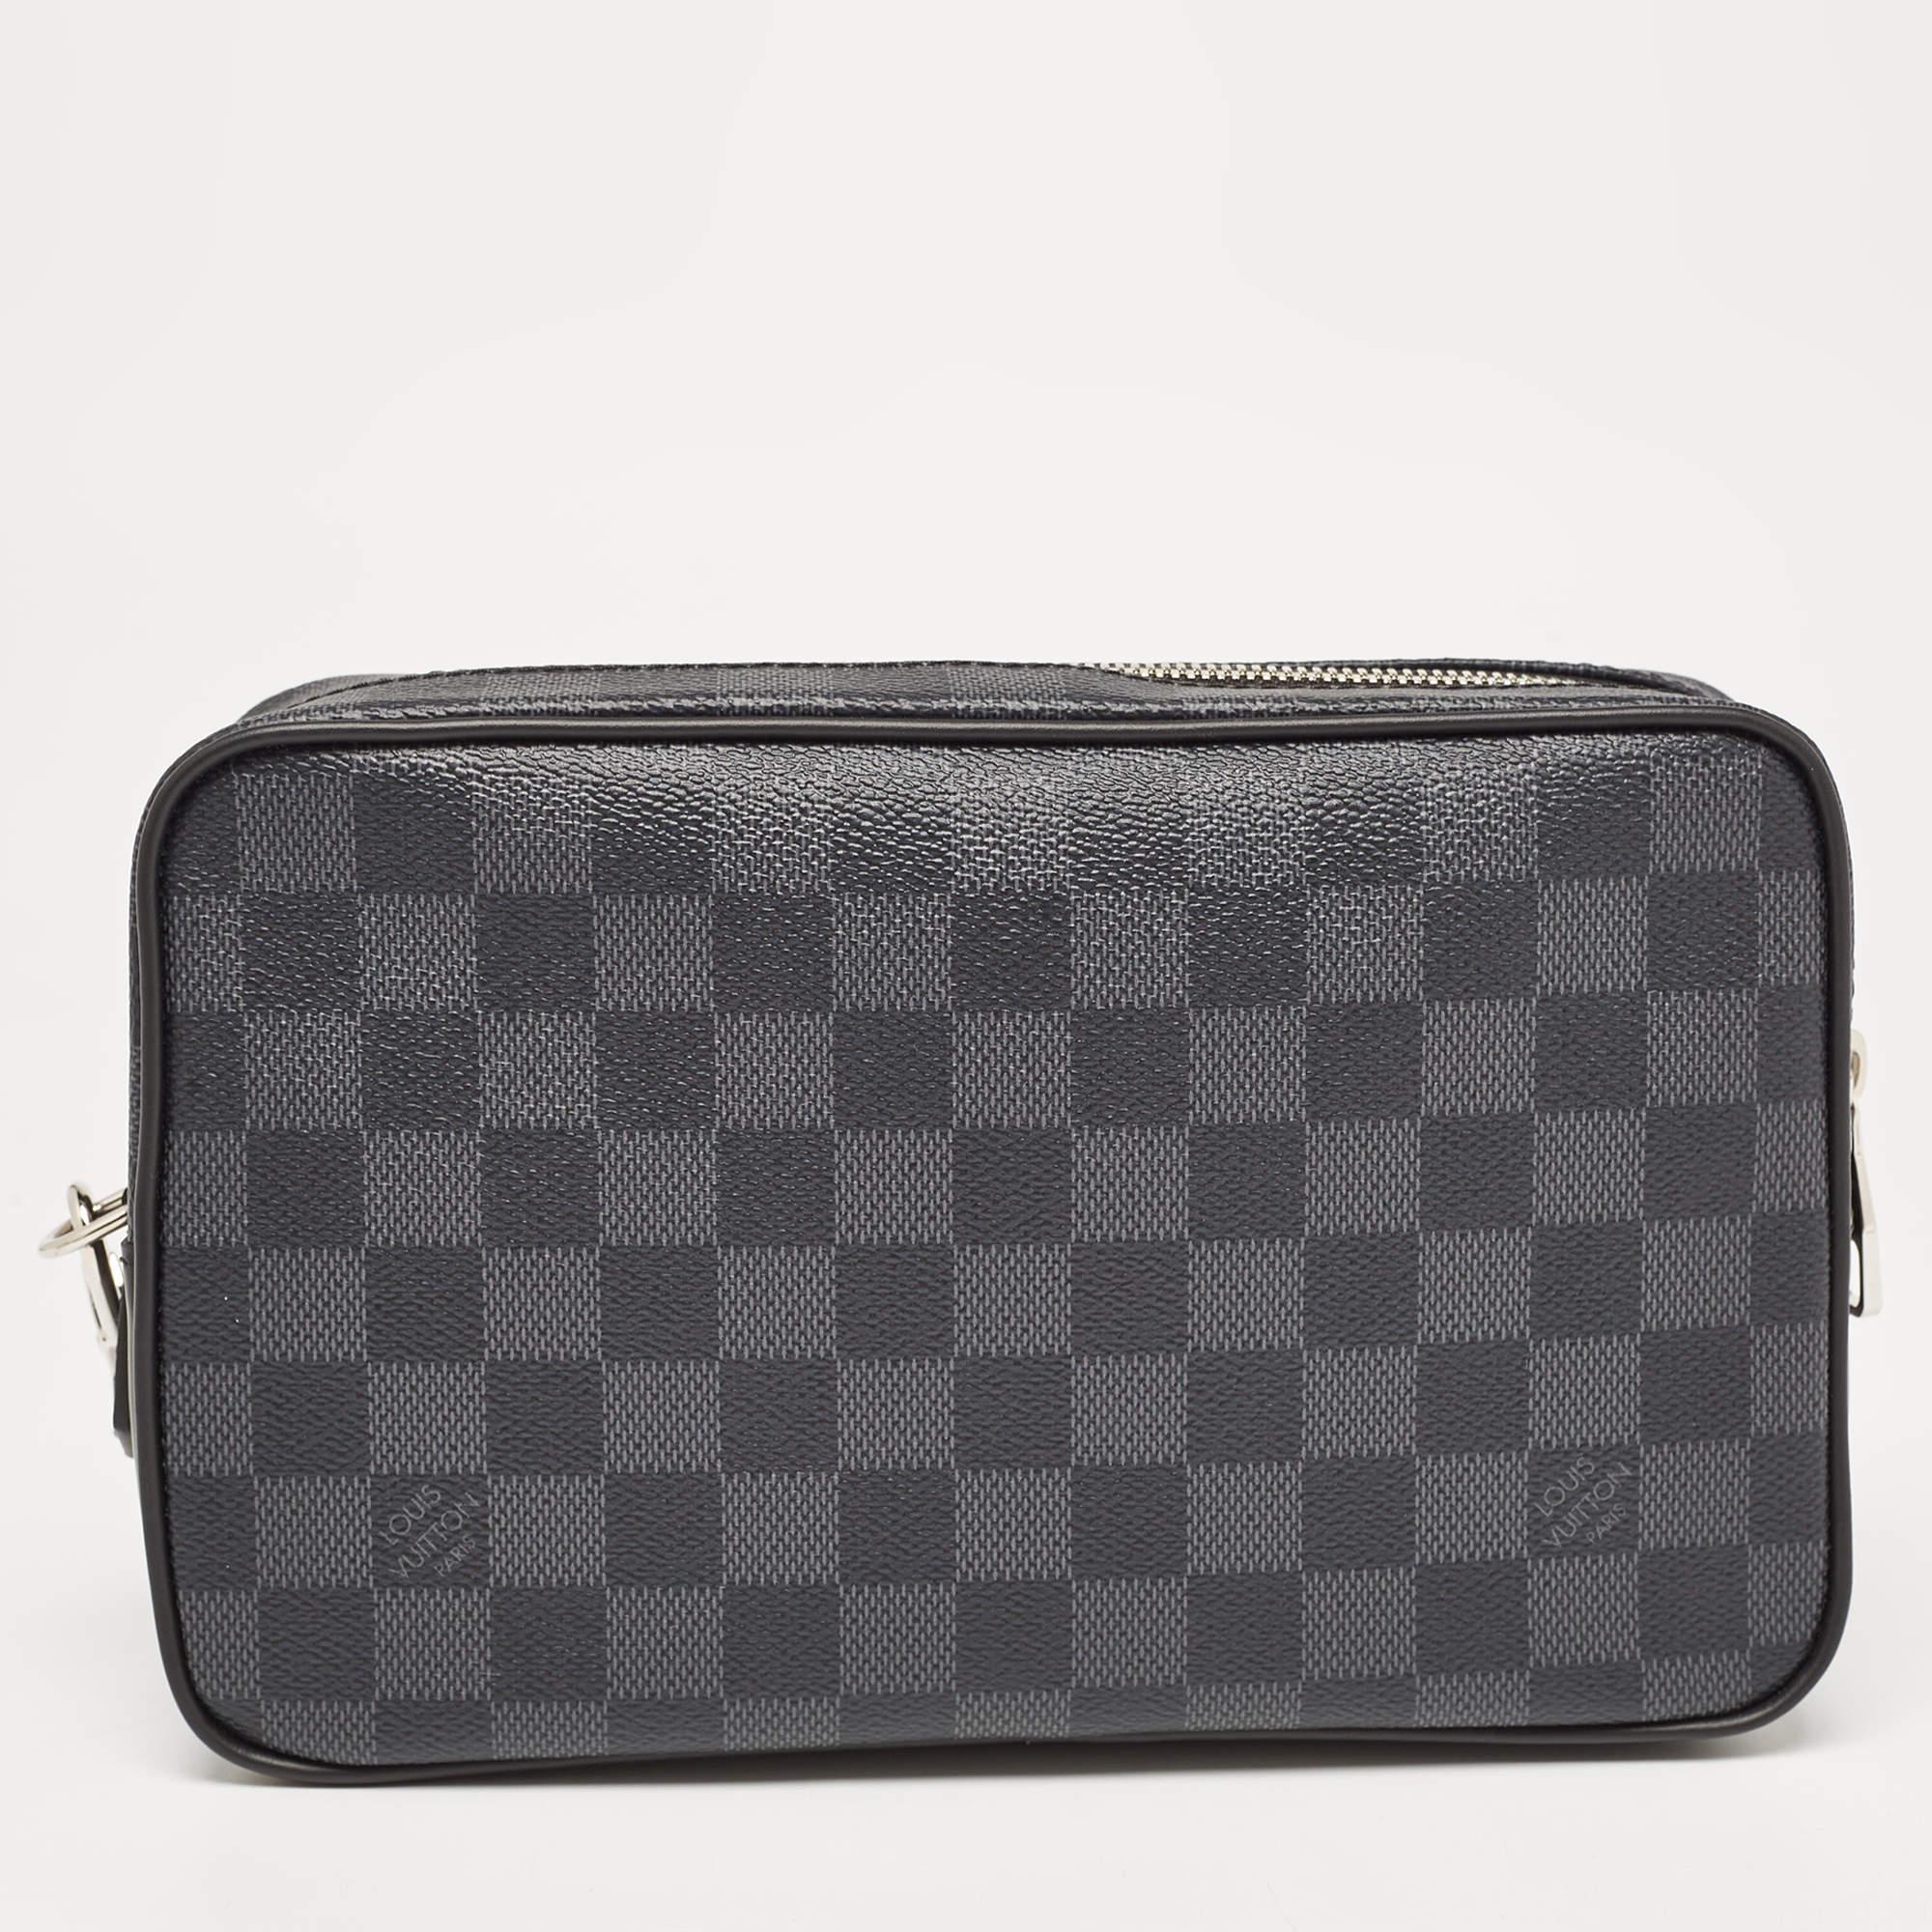 Ideal for days when you need to carry just your essentials, this chic Louis Vuitton pochette comes in handy. Designed with the best materials, you can make it a part of your closet to keep things organized, or carry it with you.

Includes: Original